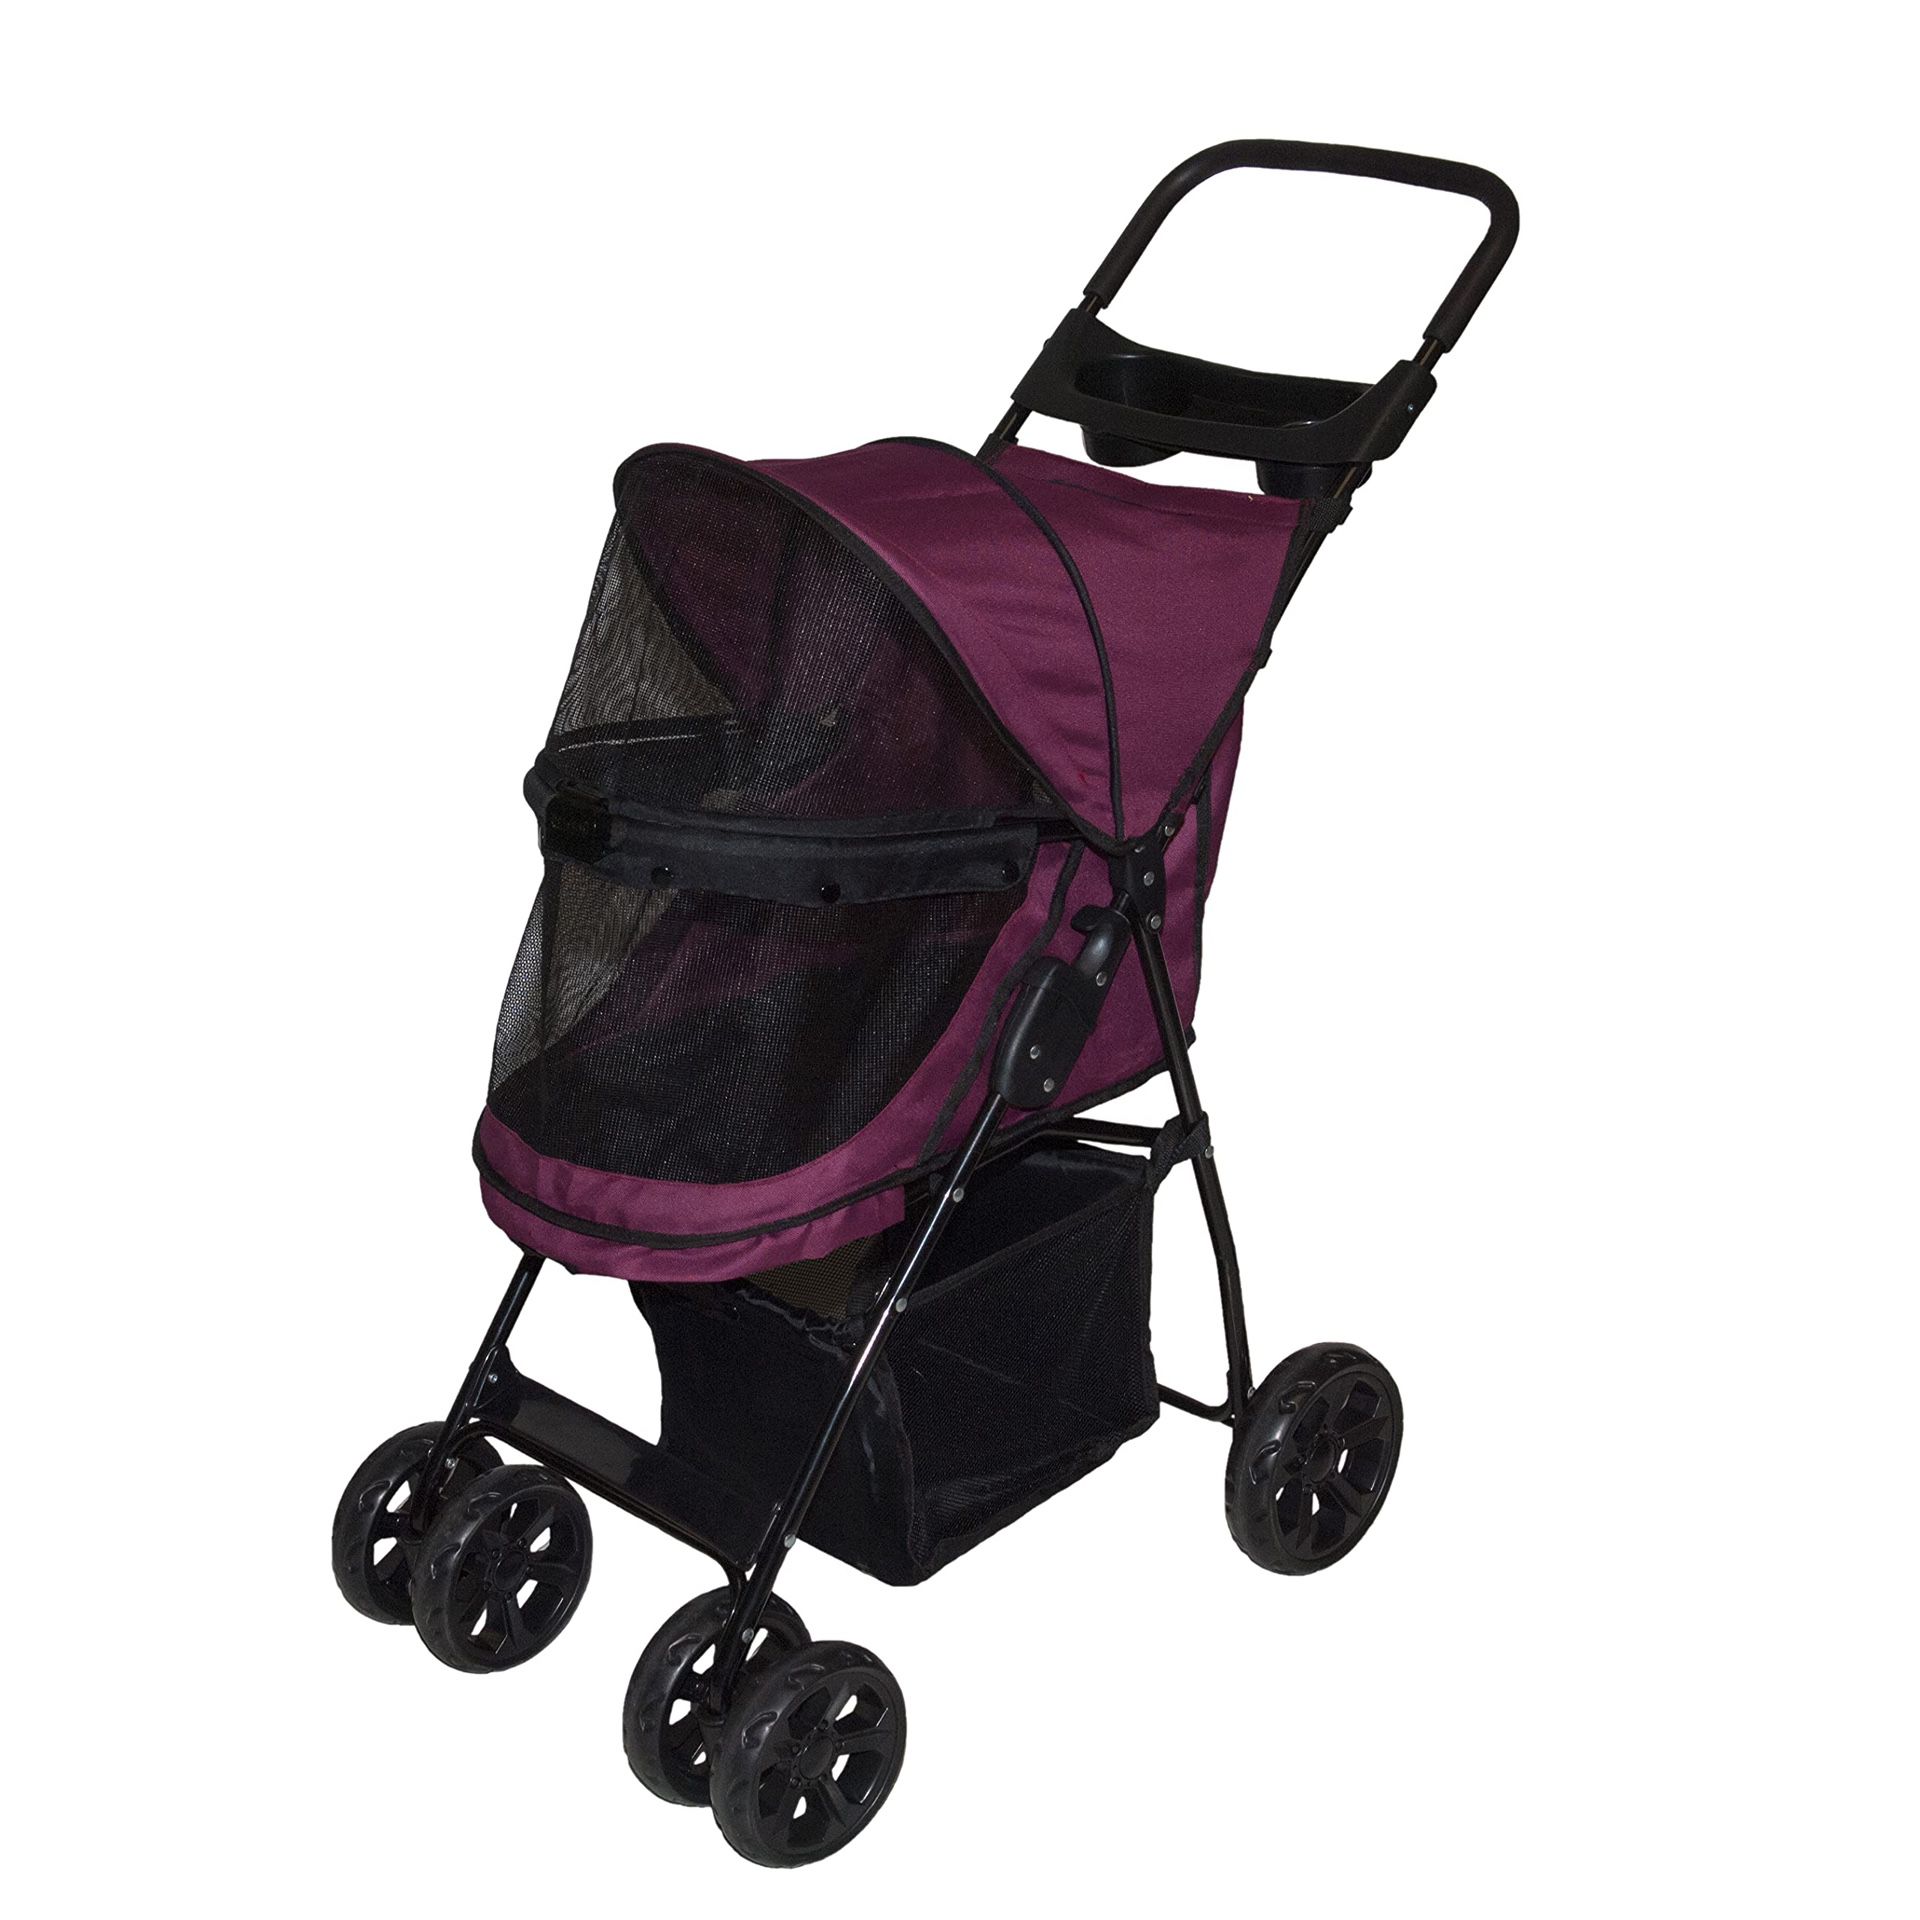 Pet Gear No-Zip Happy Trails Lite Pet Stroller For Cats/Dogs, Zipperless Entry, Easy Fold With Removable Liner, Safety Tether, Storage Basket + Cup Ho